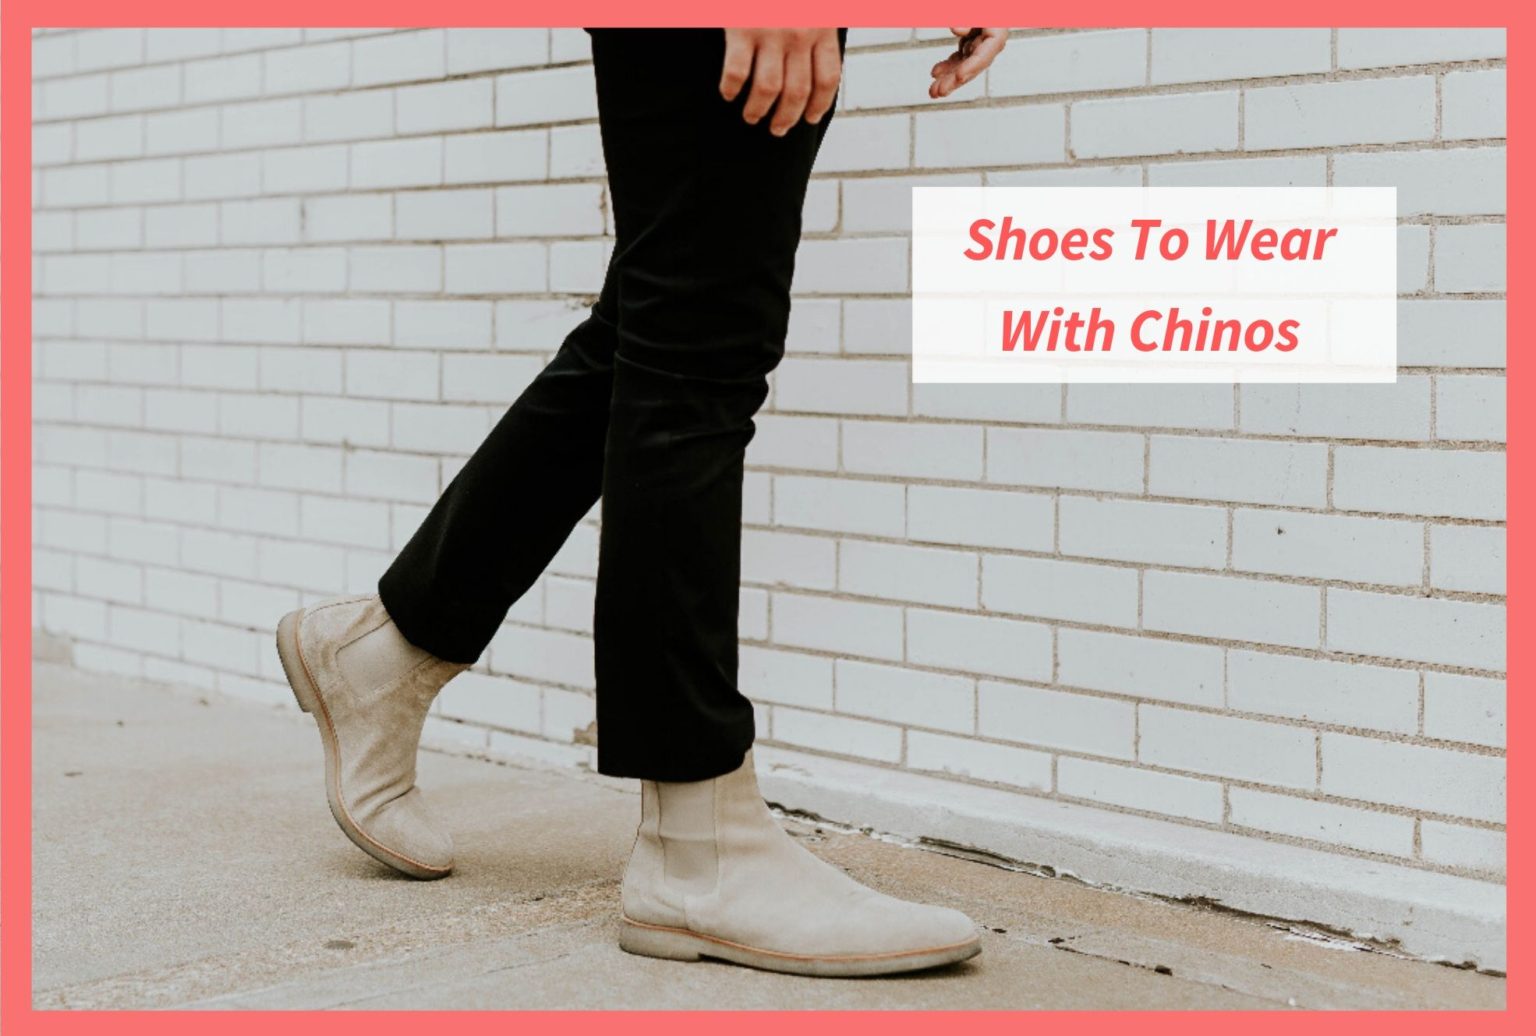 These 6 Shoes Look Fantastic With Chinos - The Shoestopper